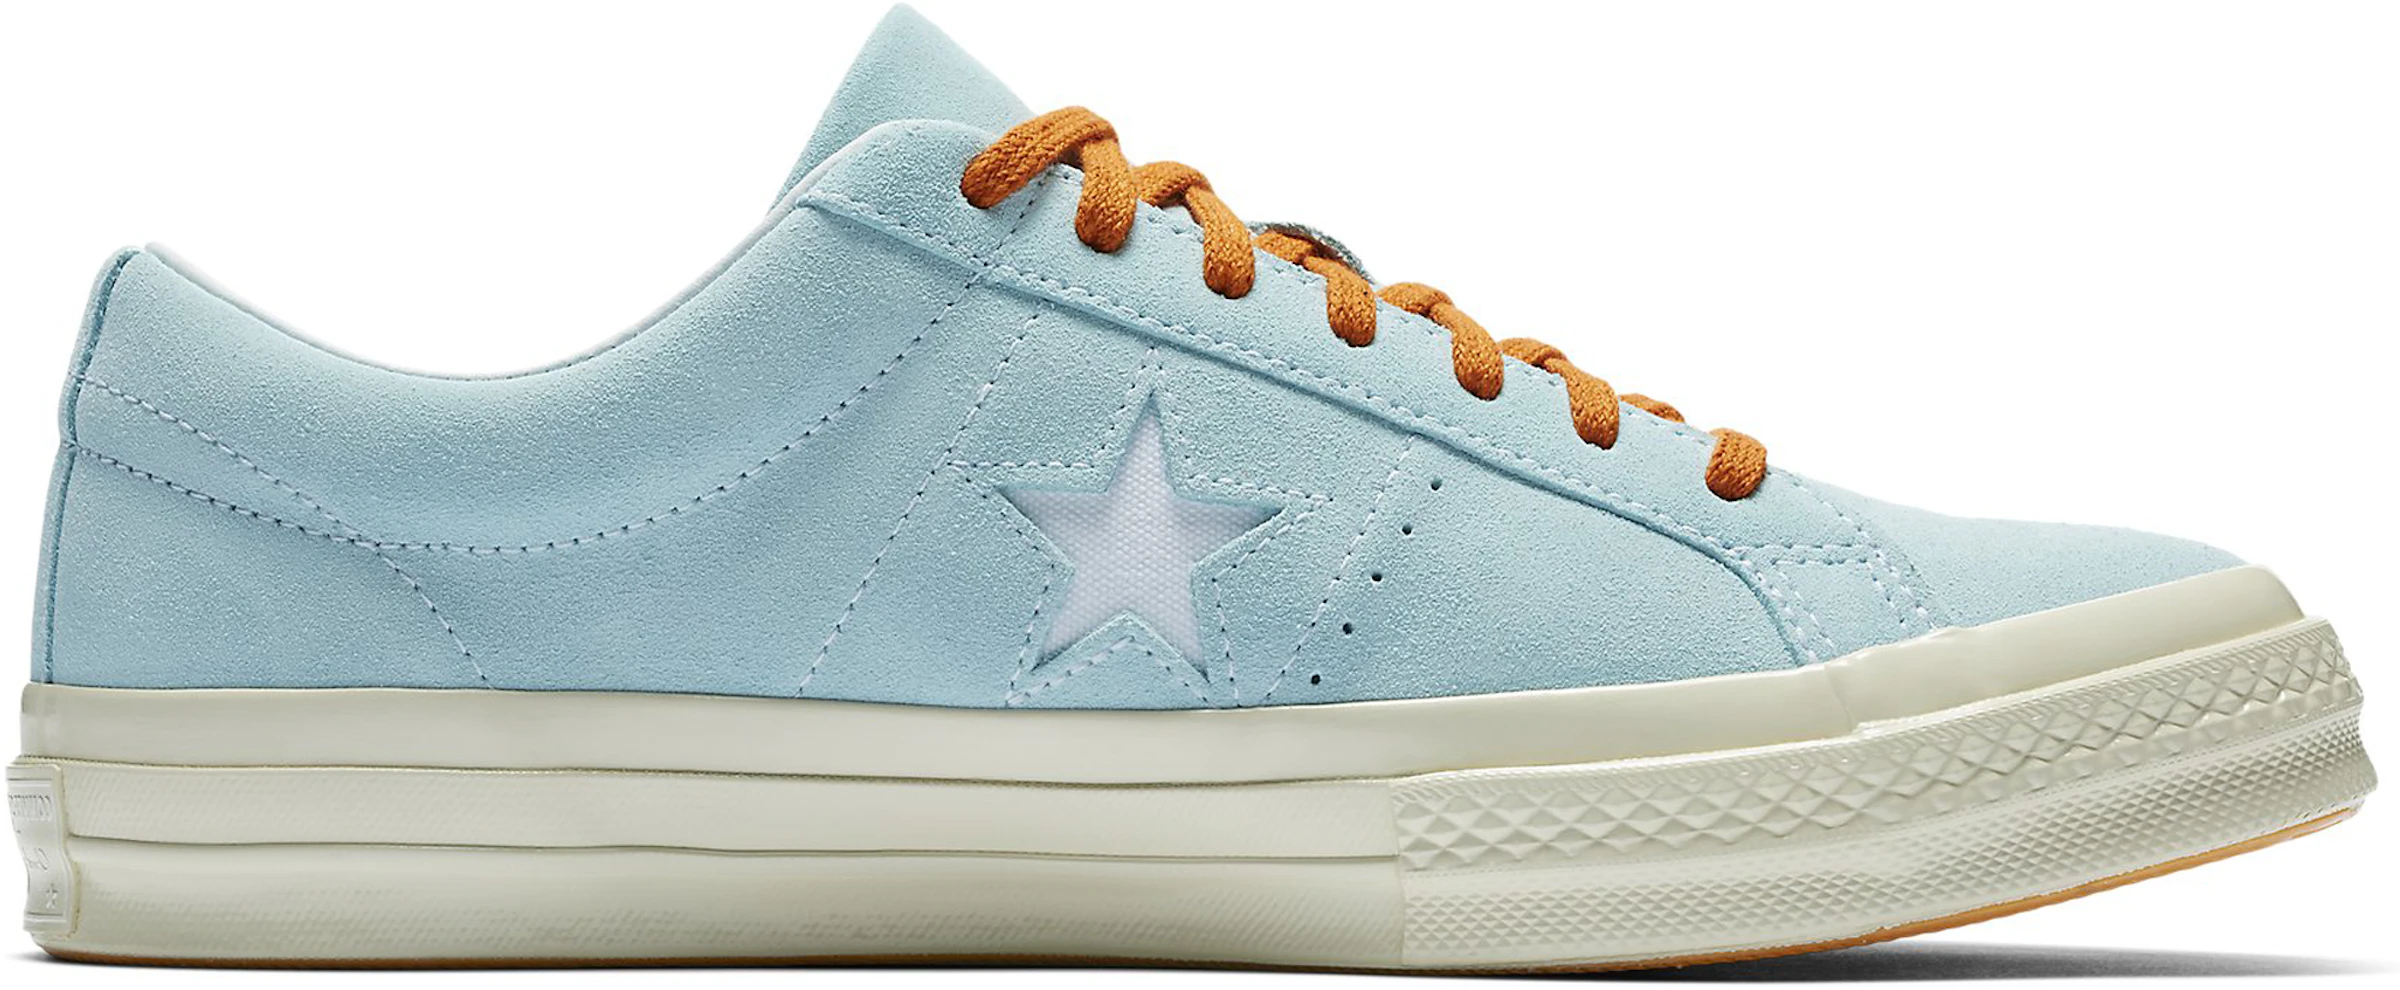 Converse One Star Tyler the Creator Wang Clearwater - 160111C - ES